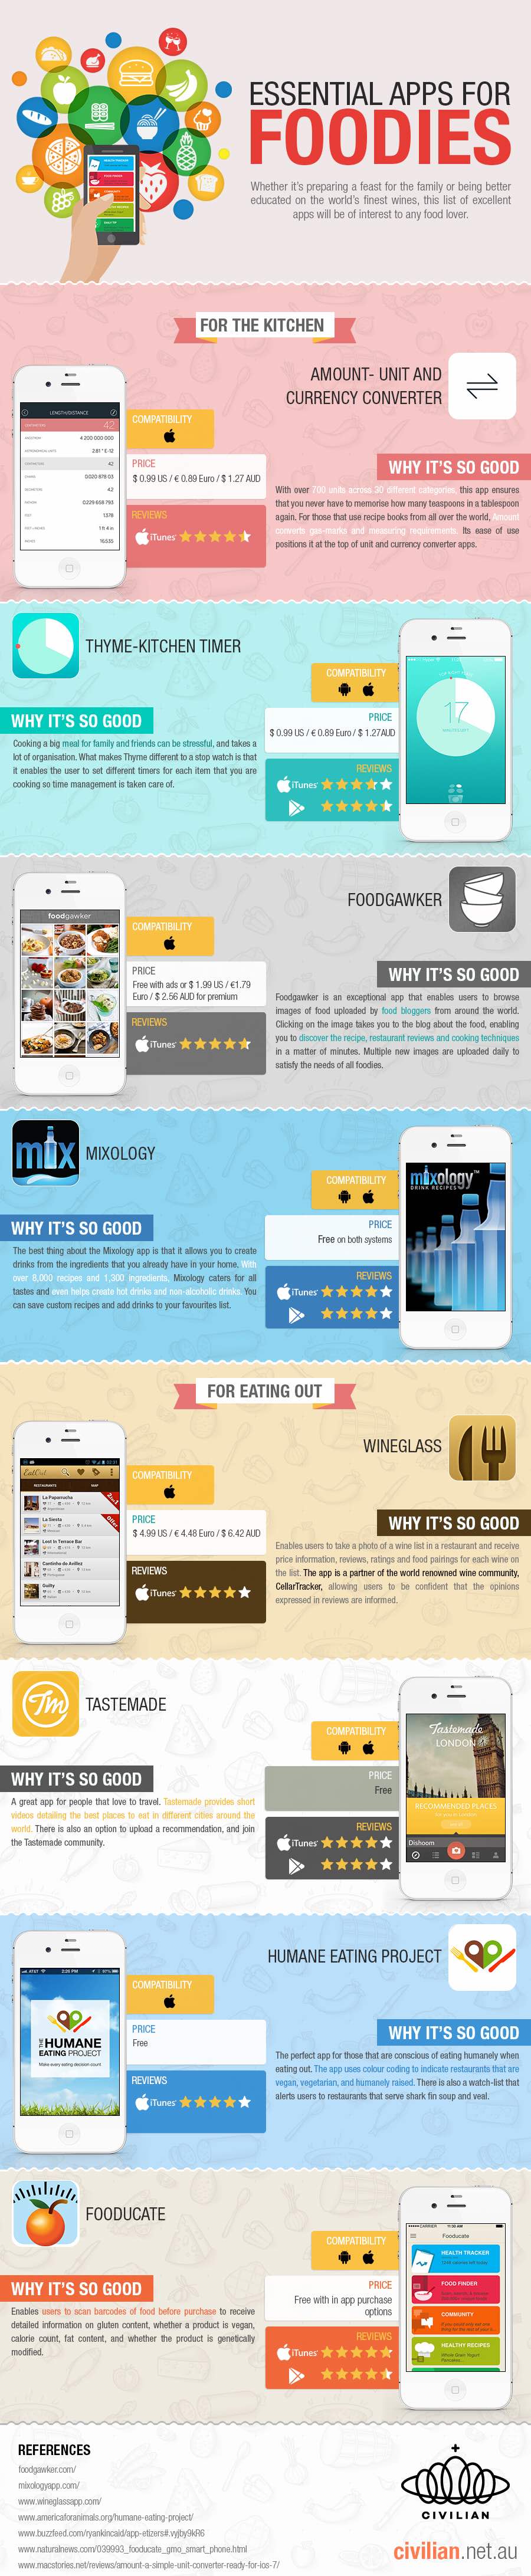 Essential-Apps-for-Foodies